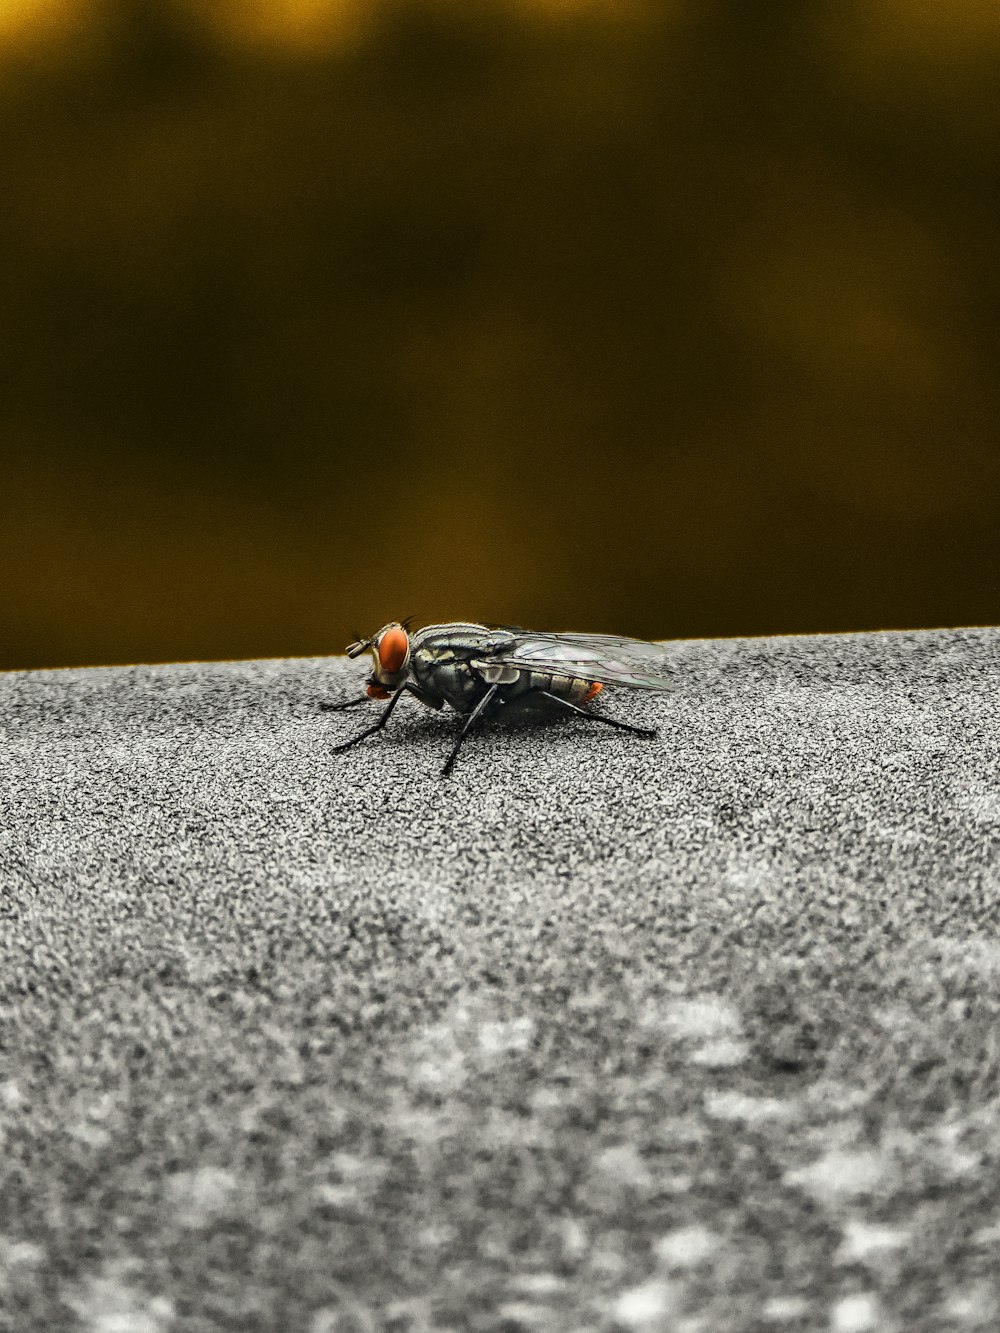 black fly on grey concrete surface in close up photography during daytime